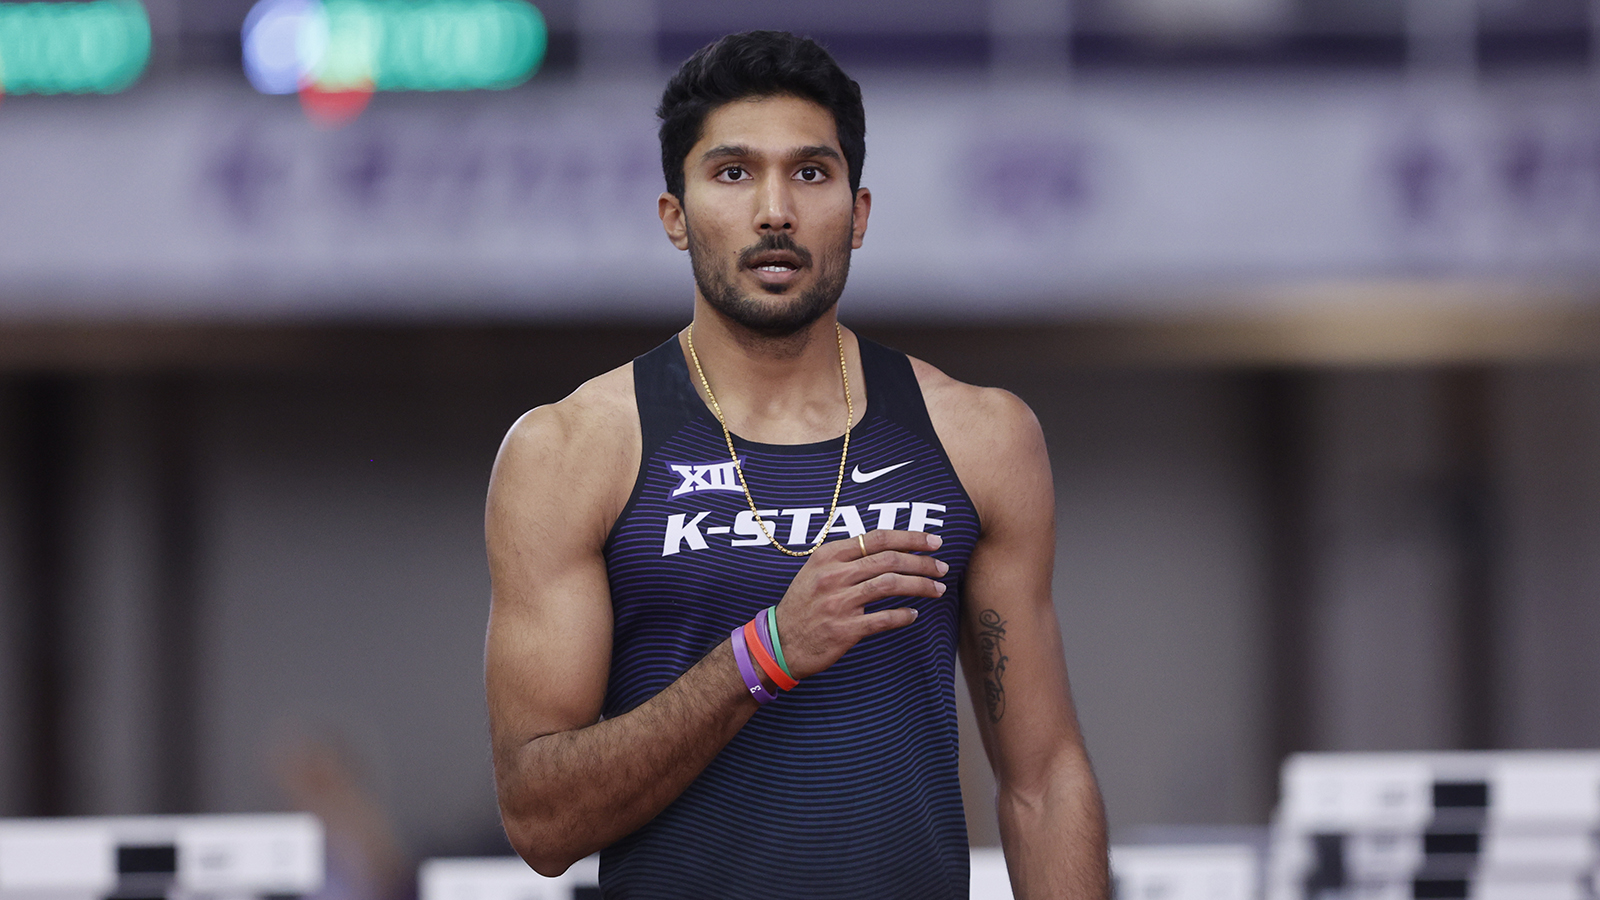 Commonwealth Games 2022: Delhi High Court SLAMS AFI to rule in favour of medal prospect Tejaswin Shankar, says 